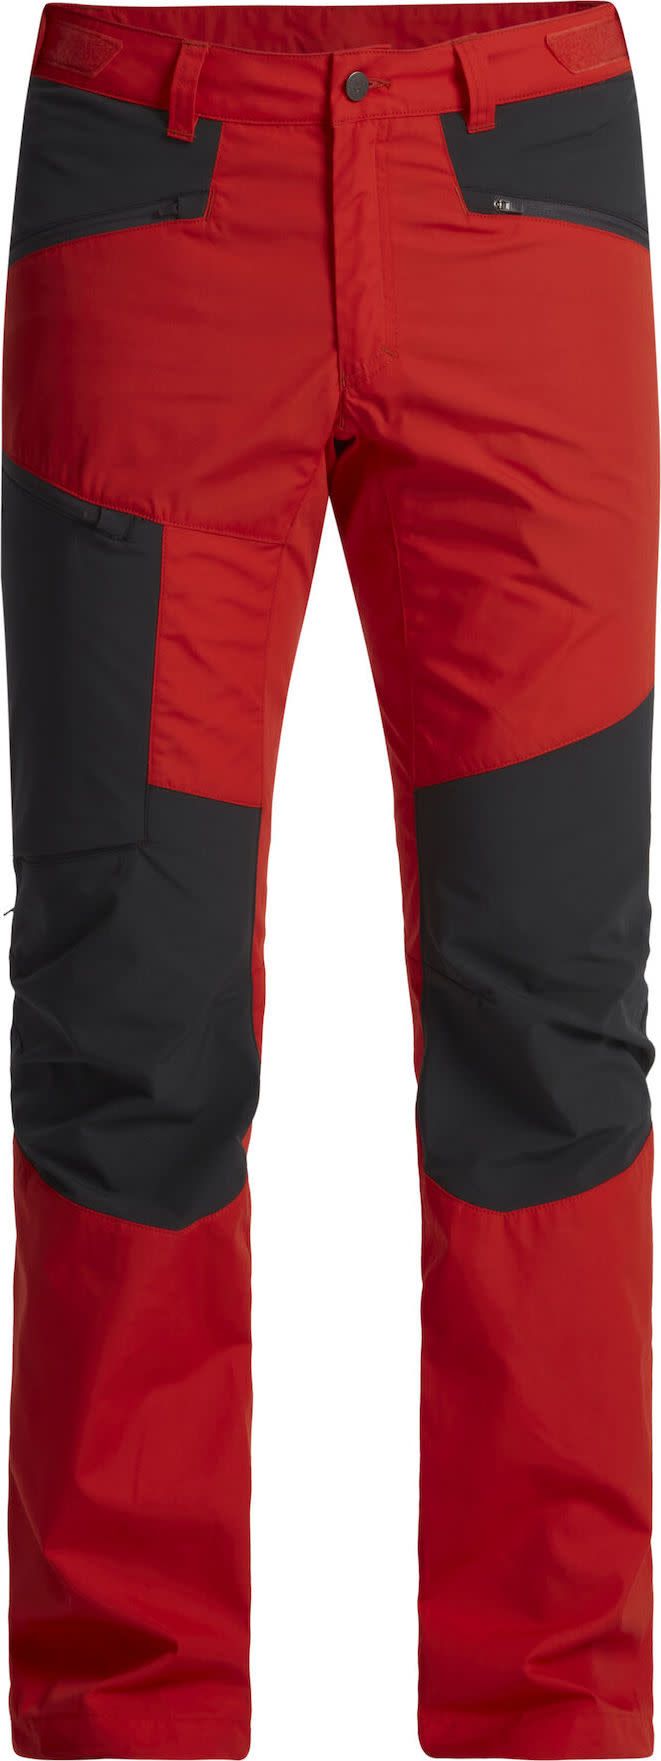 Lundhags Men's Makke Light Pant Lively Red/Charcoal Lundhags